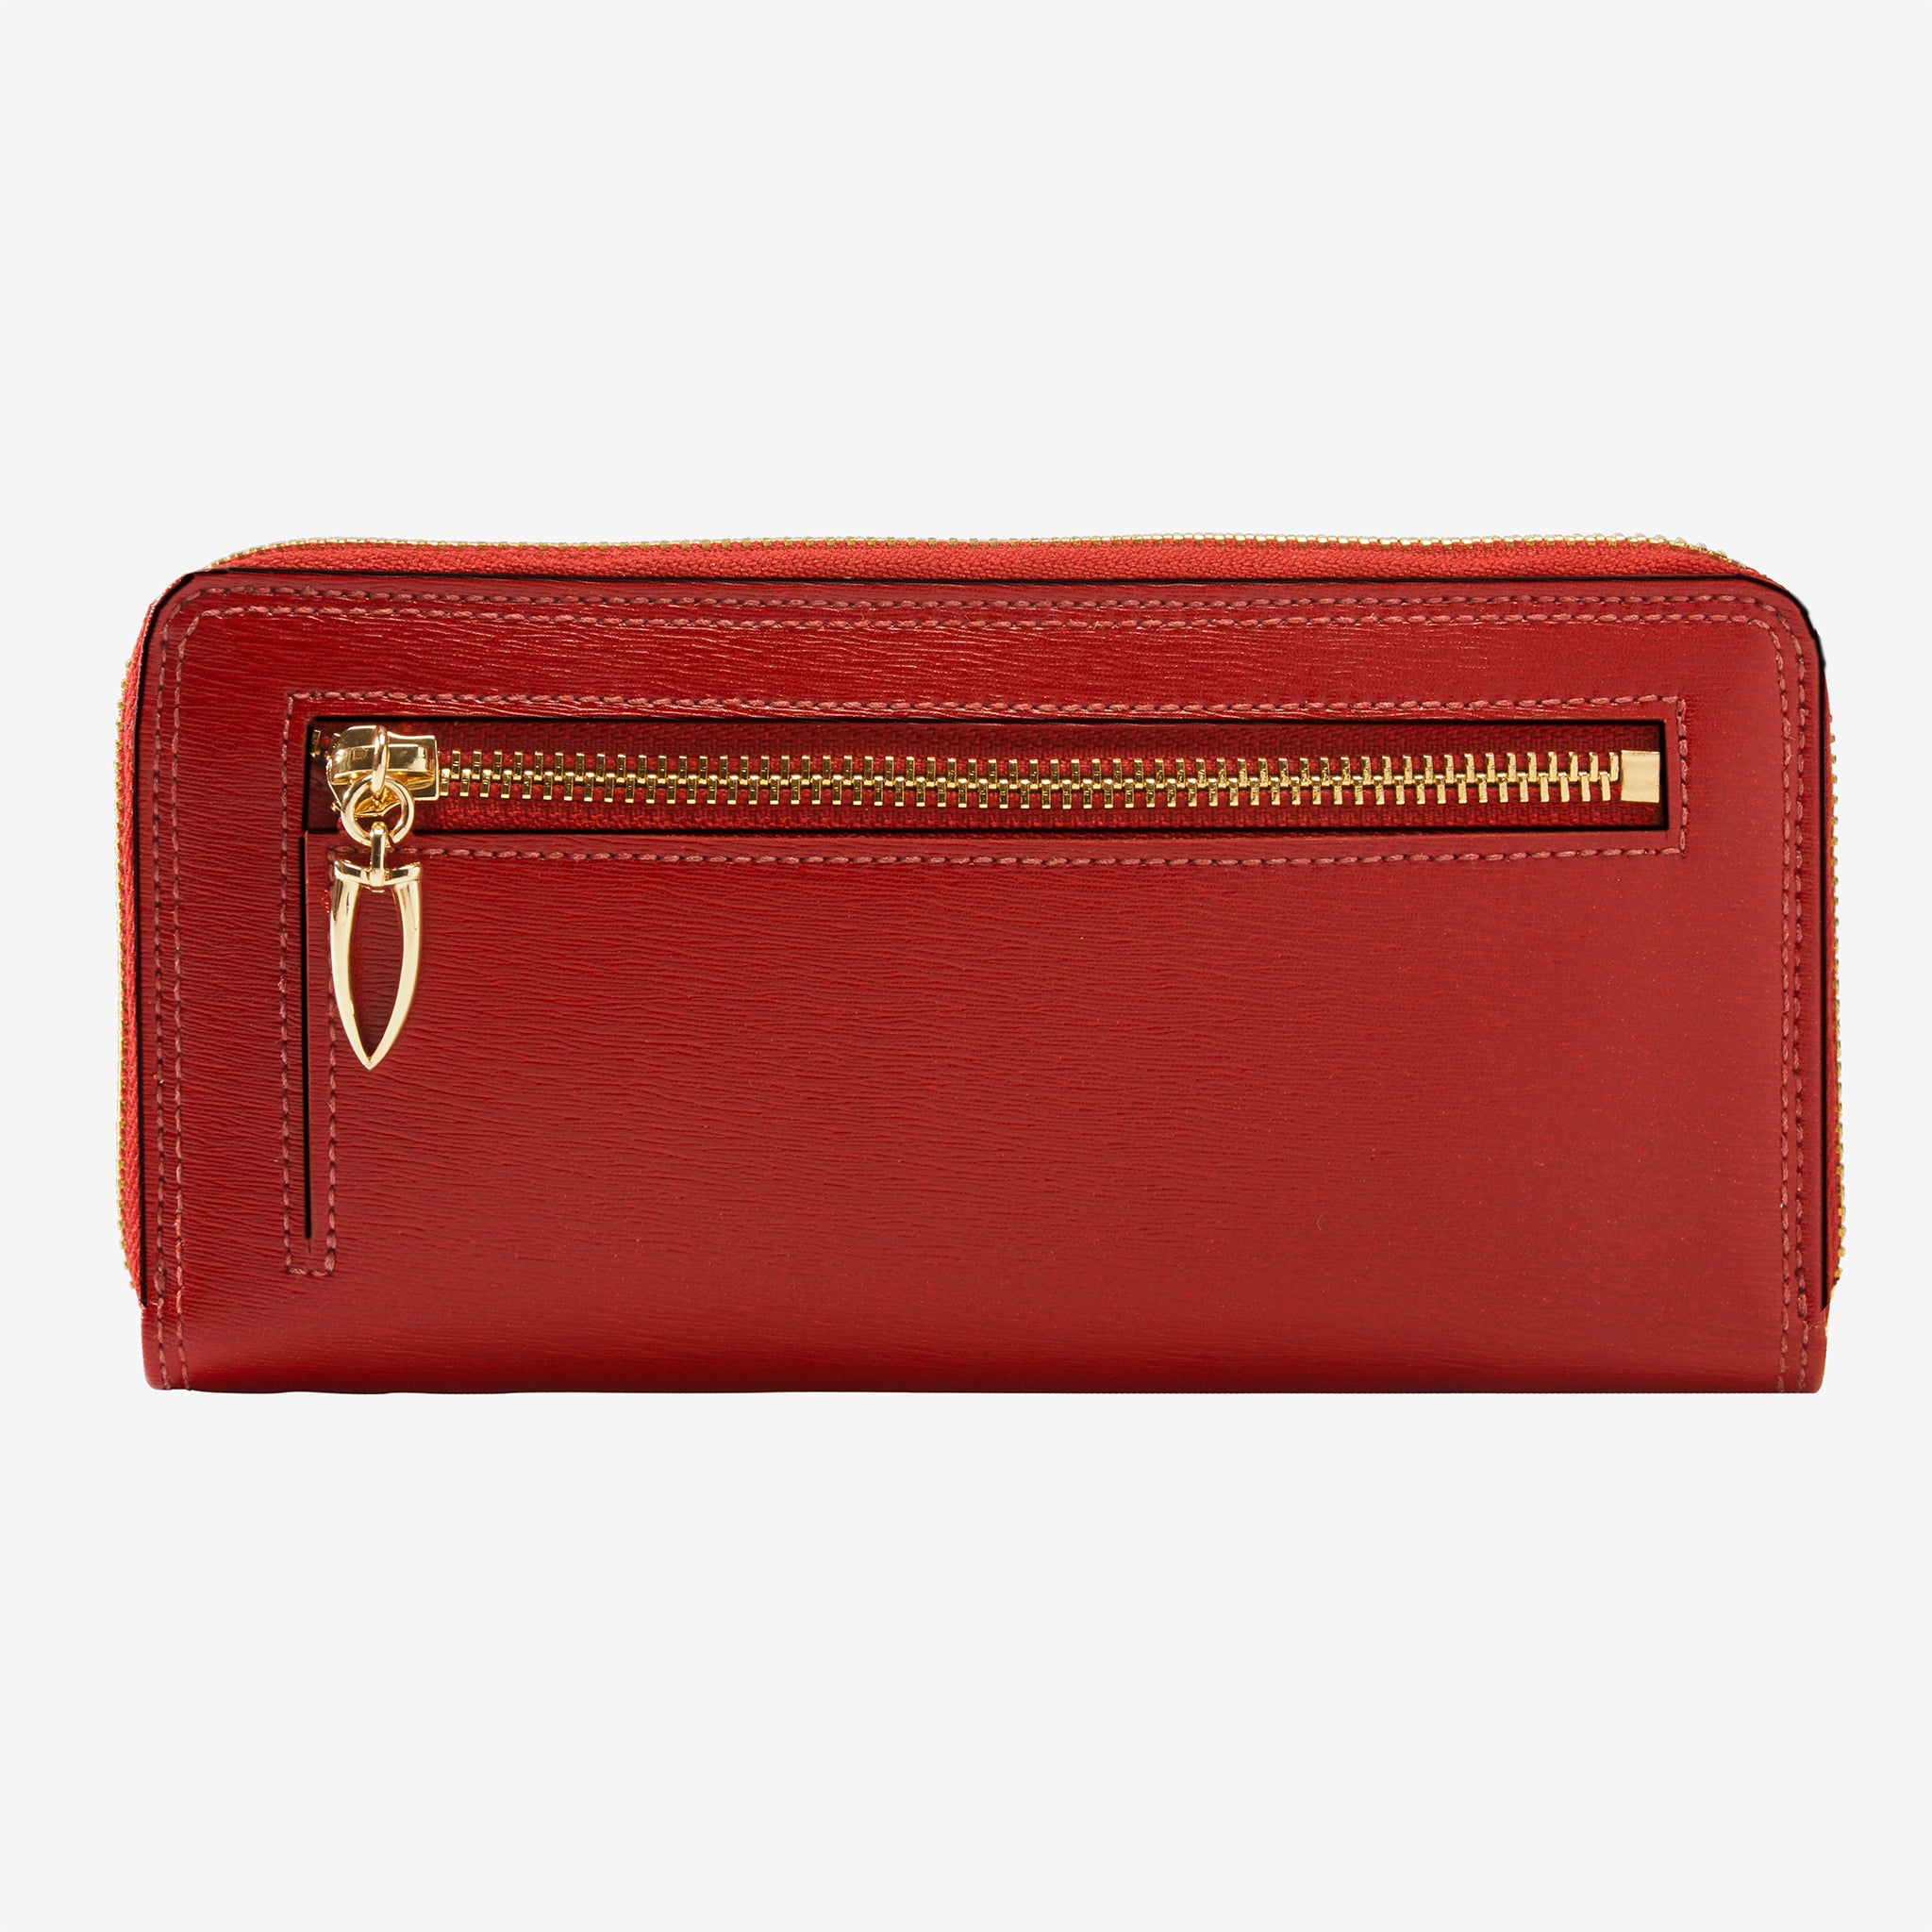 Buy Fossil Ronnie Red Solid Leather Flap Sling Bag For Women At Best Price  @ Tata CLiQ